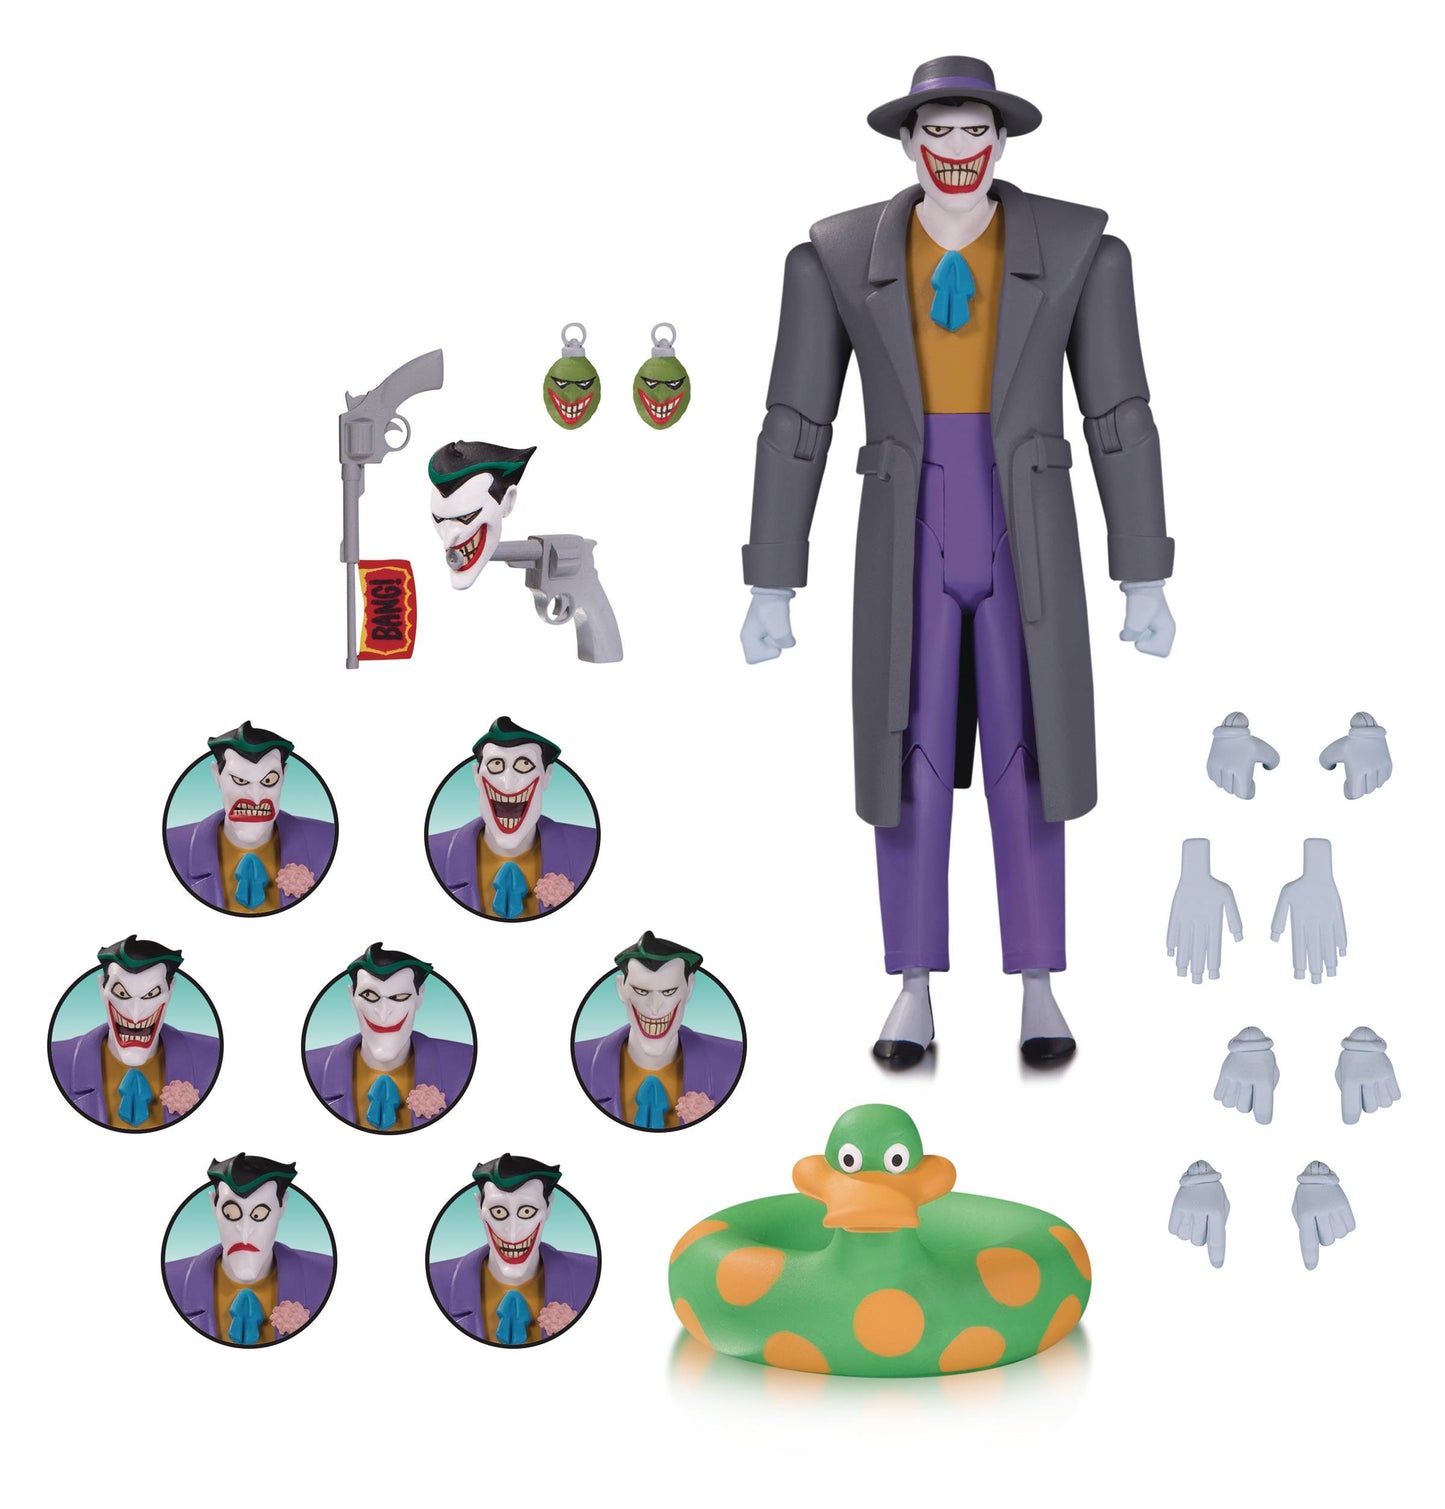 Batman The Animated Series: The Joker Expressions Pack